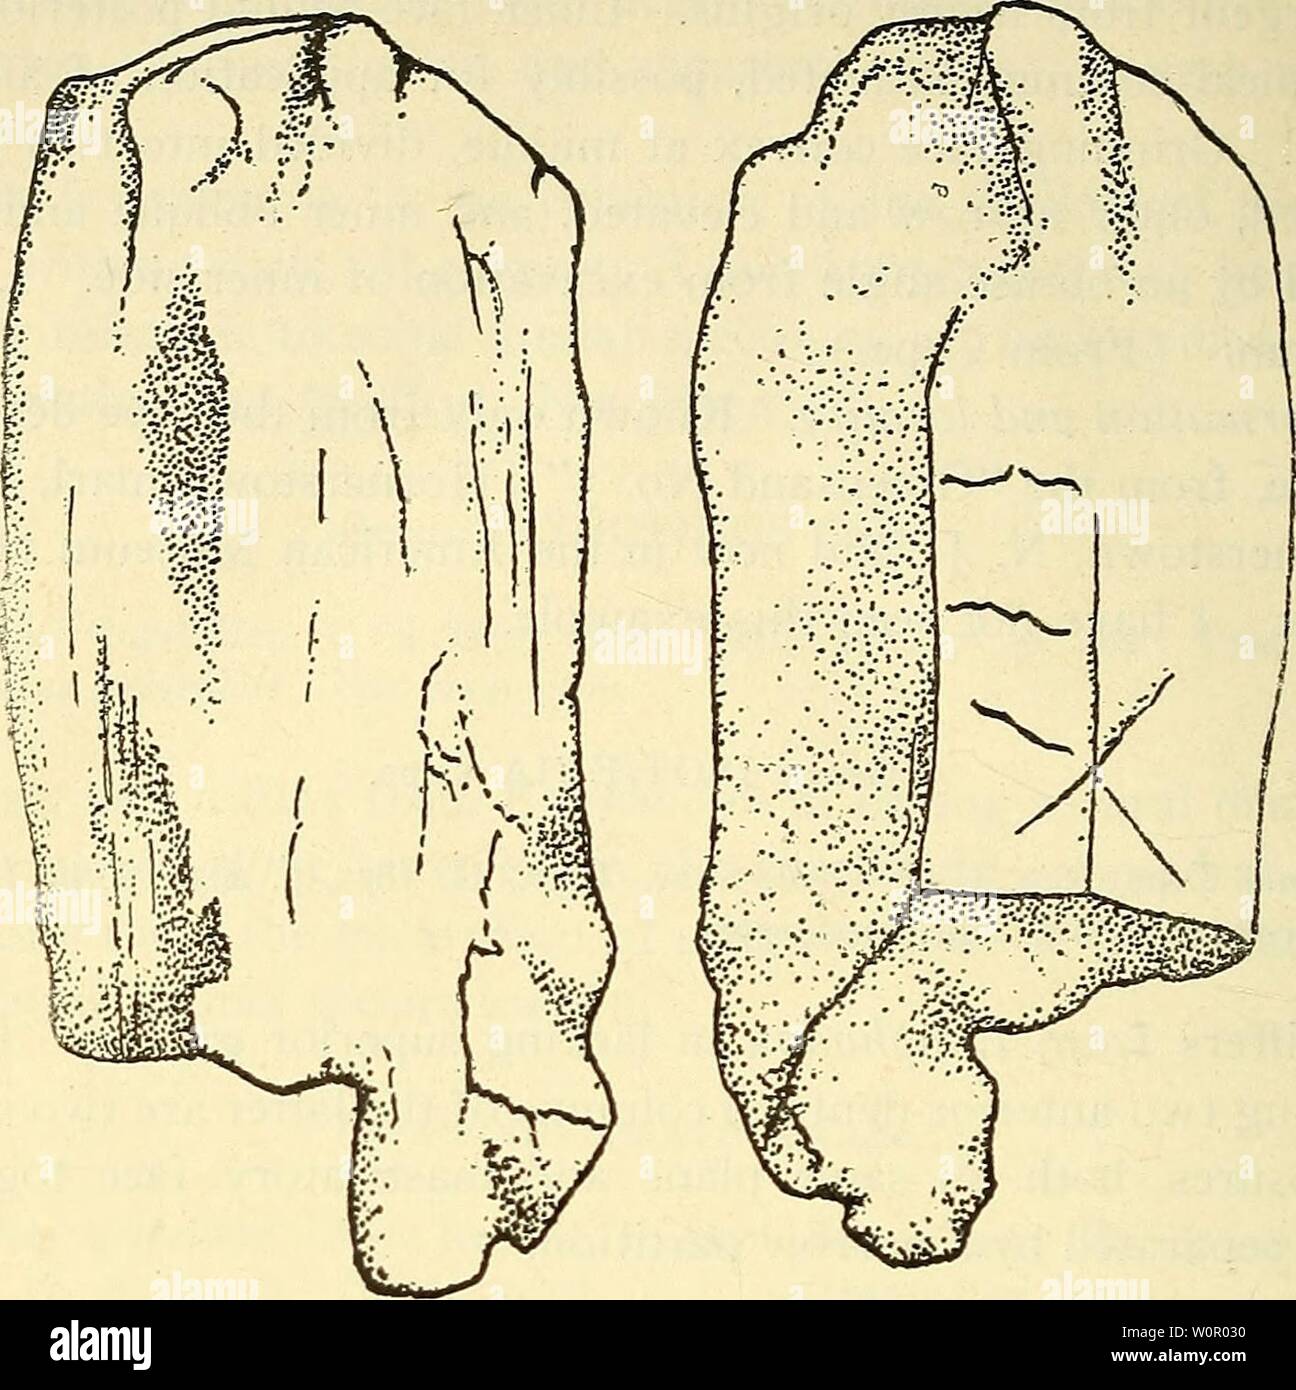 Archive image from page 181 of A description of the fossil. A description of the fossil fish remains of the Cretaceous, Eocene and Miocene formations of New Jersey descriptionoffos00fowl Year: 1911  136 CRETACEOUS AND TERTIARY FISH.    Fig. 84.—Isotcenia neocasariensis Cope. (Type, from Hussakof.) Hornerstown in Monmouth County (J. G. Miers), and now in the American Museum at New York. I have not seen this speci- men. Genus LEPTOMYLUS Cope. Leptomylus Cope, Proc. Boston Soc. N. H., XII, 1869, p. 313. Type Lepto- mylus densus Cope, monotypic. This genus is related to Psaliodus Egerton,1 differi Stock Photo